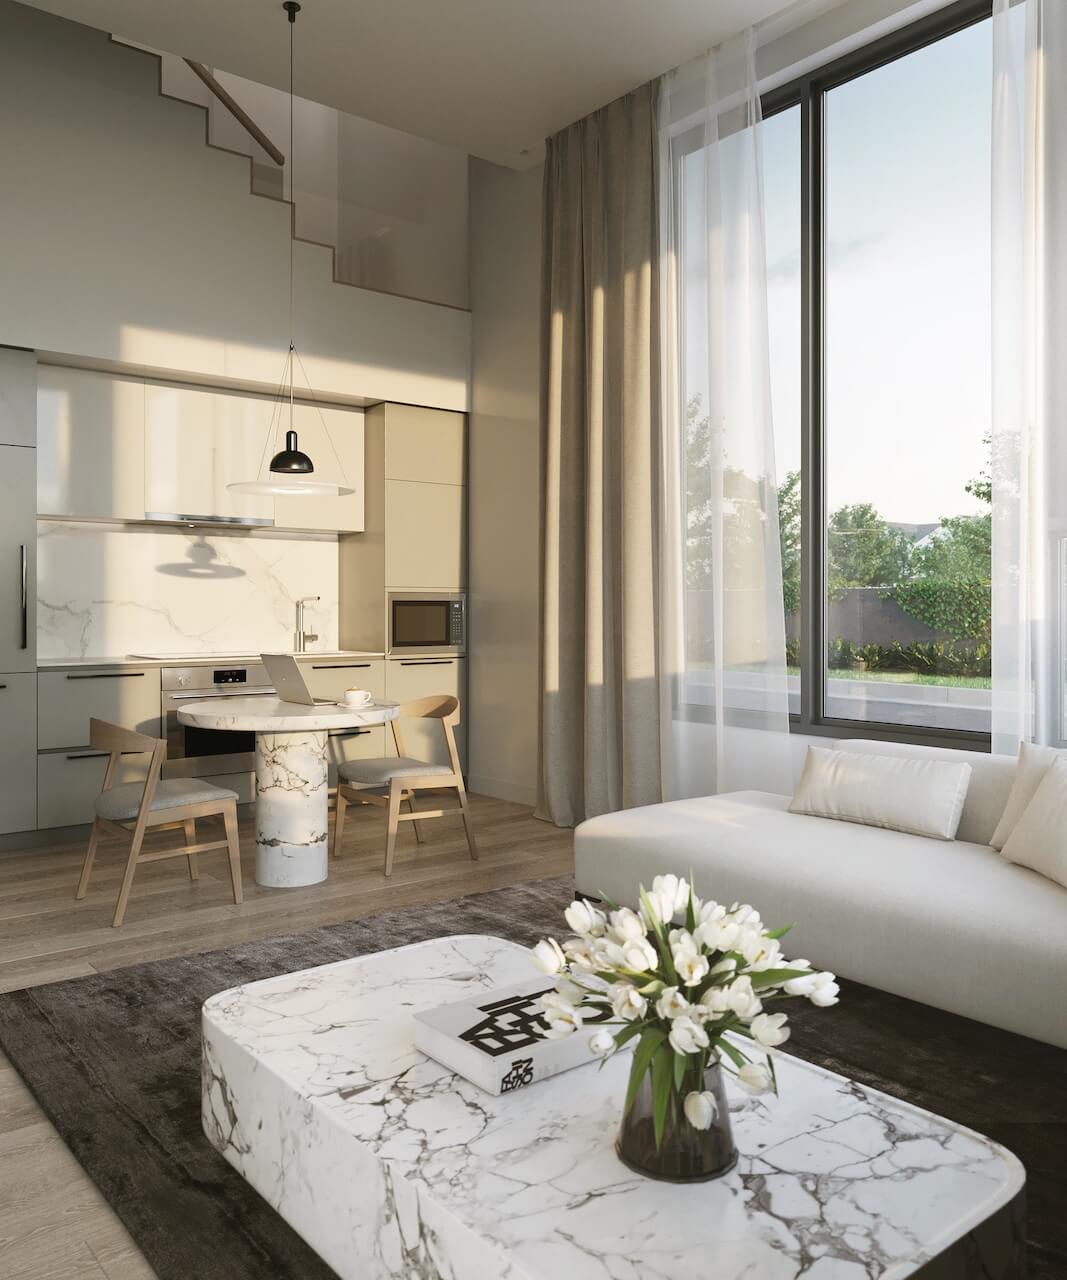 Rendering of The Leaside townhome interior